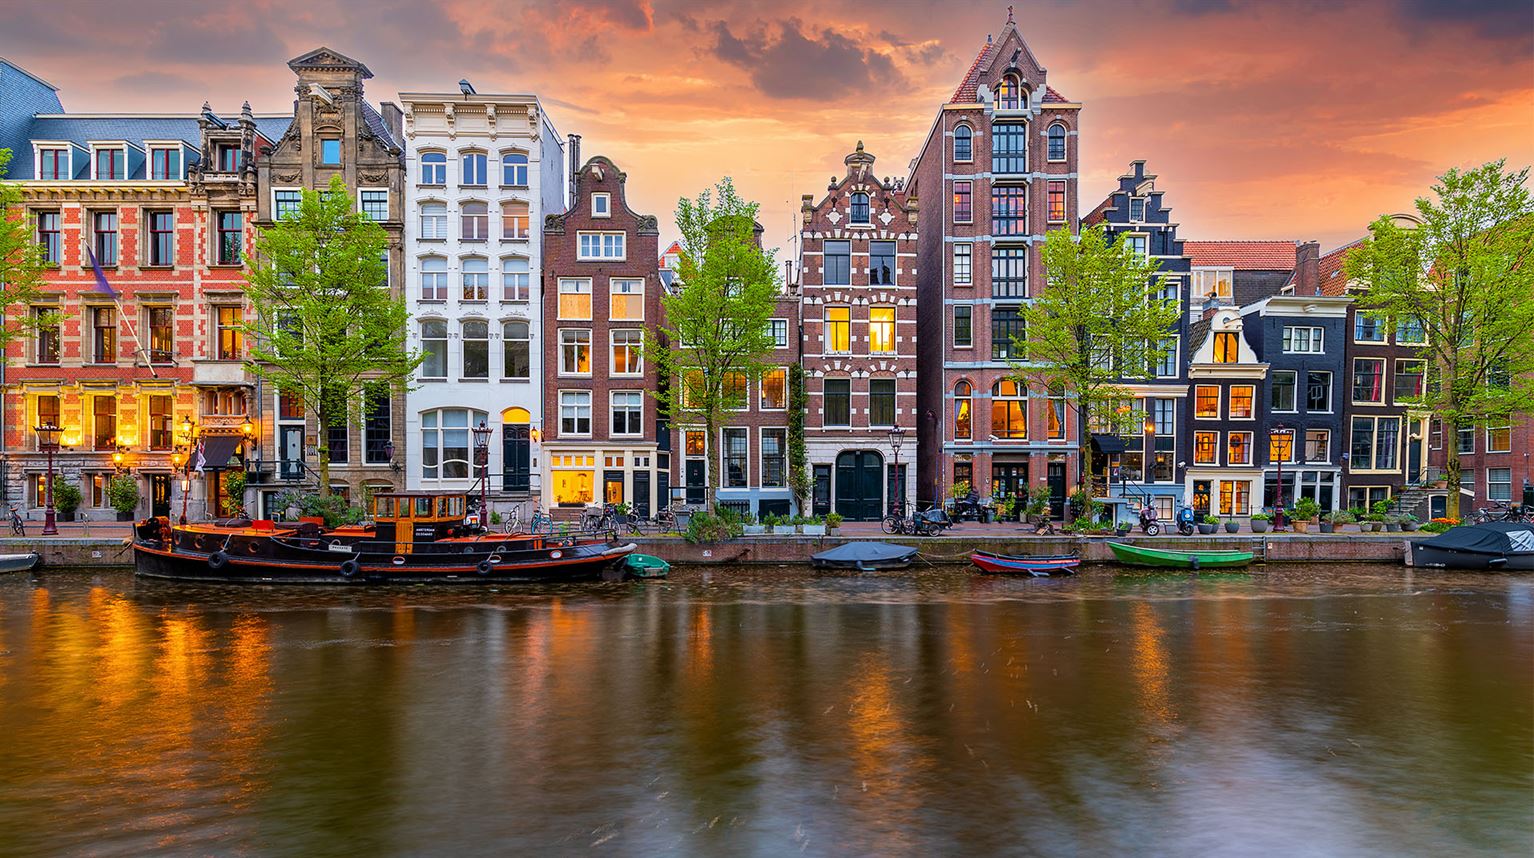 Water canals, boats and colorful houses in Amsterdam, Netherlands